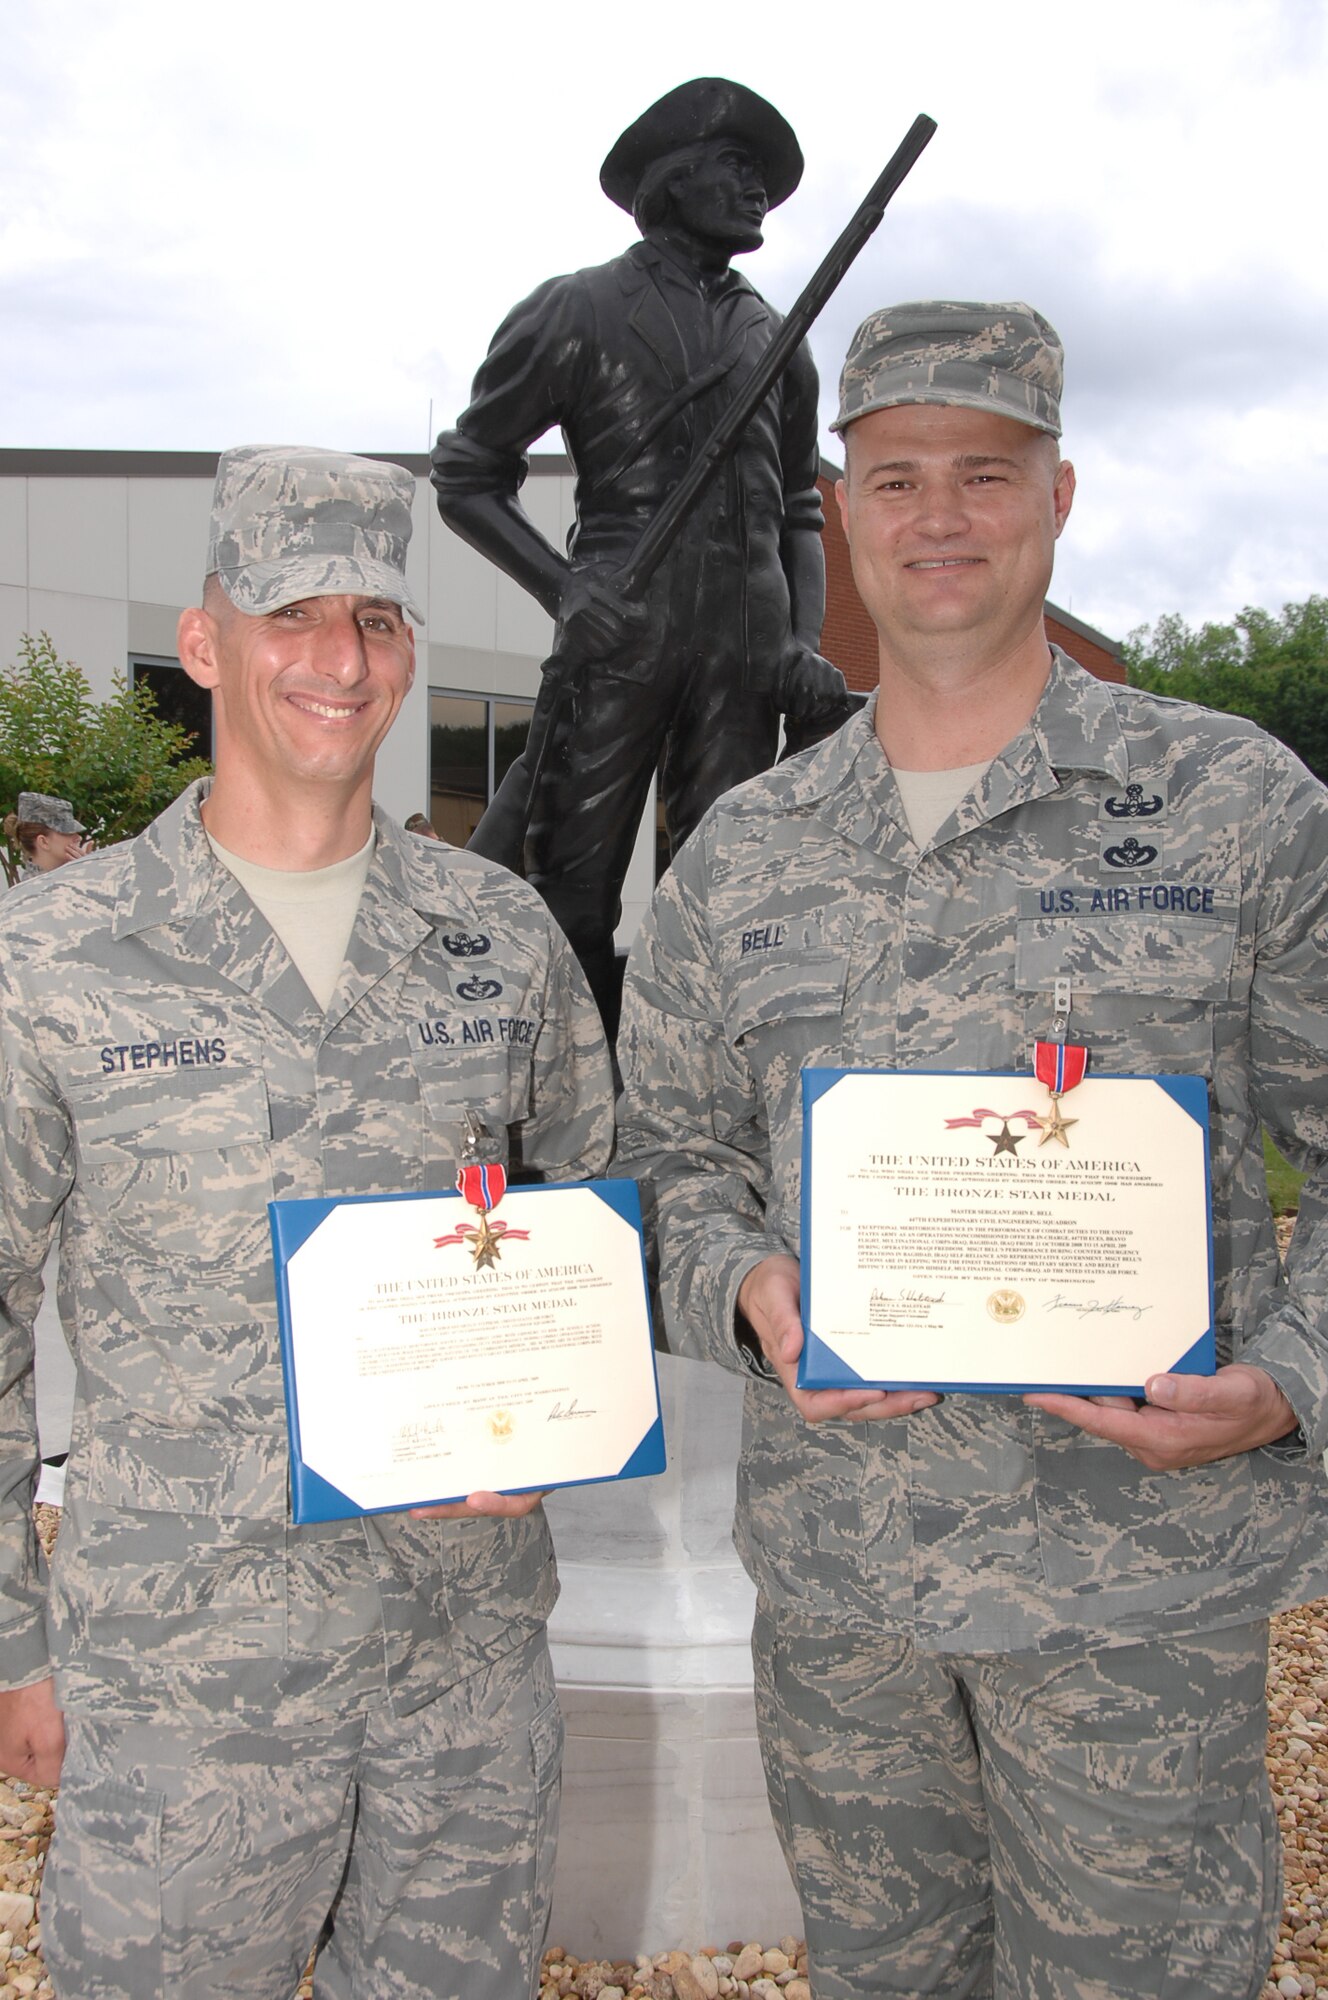 Master Sgts. Greg Stephens and John Bell were awarded Bronze Star medals for their work in supporting Operation Iraqi Freedom from October 2008 to April 2009 as members of the 447th Expeditionary Civil Engineering Squadron, Bravo Flight, Multi-National Corps-Iraq, Baghdad. 